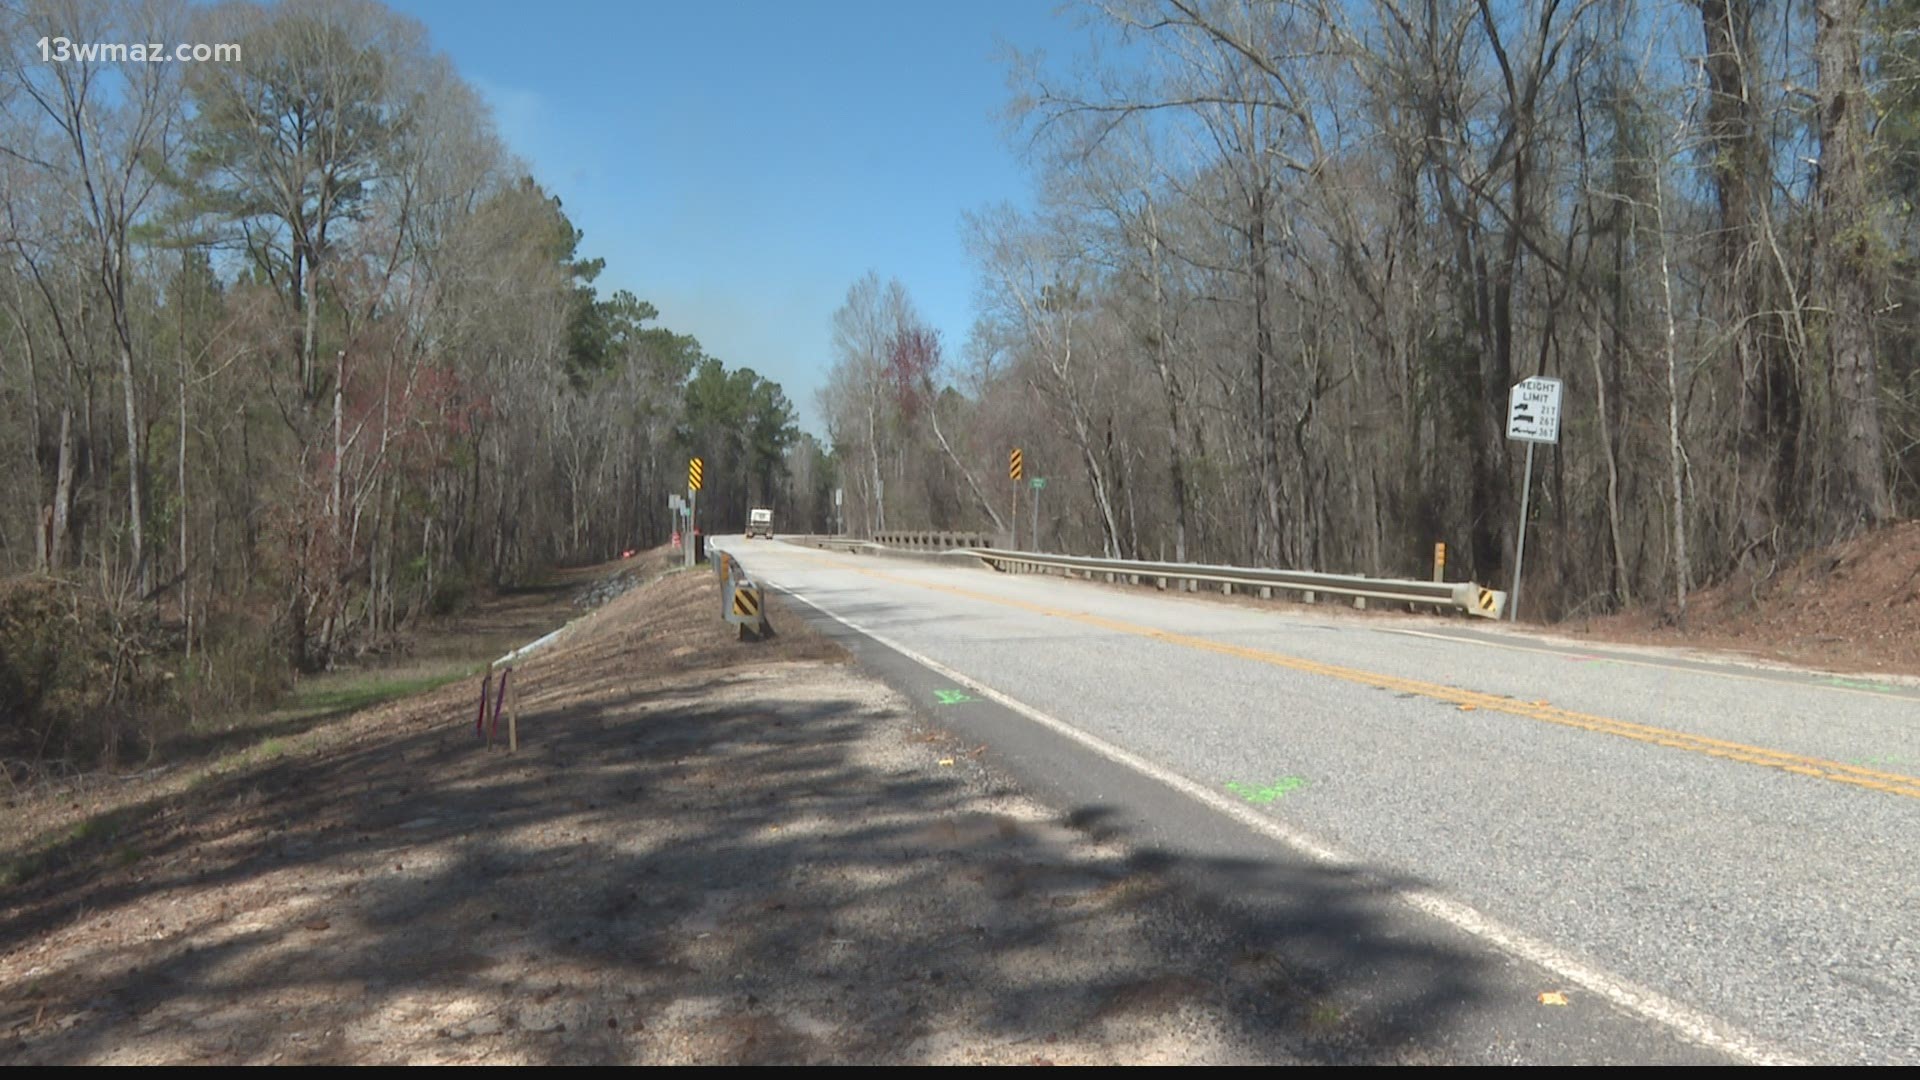 Georgia Department of Transportation will upgrade a bridge along State Road 230, causing for a 120-day road closure.